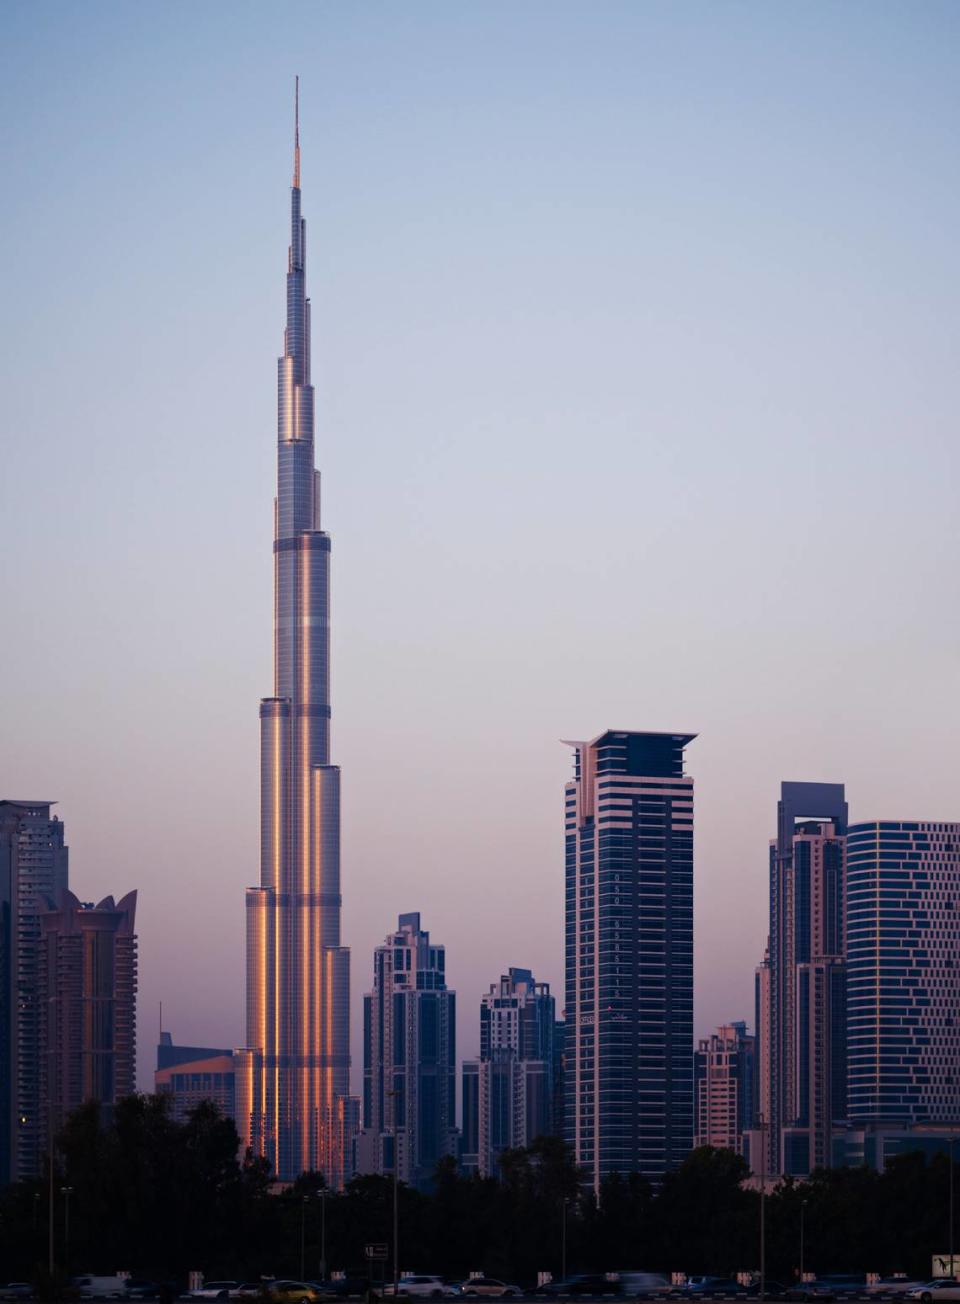 The Burj Khalifa in Dubai is the world’s tallest building. It stands at 2,717 feet, or 828 meters, high. Chicago-based Skidmore, Owings & Merrill provided the architect and structural engineer for the tower.